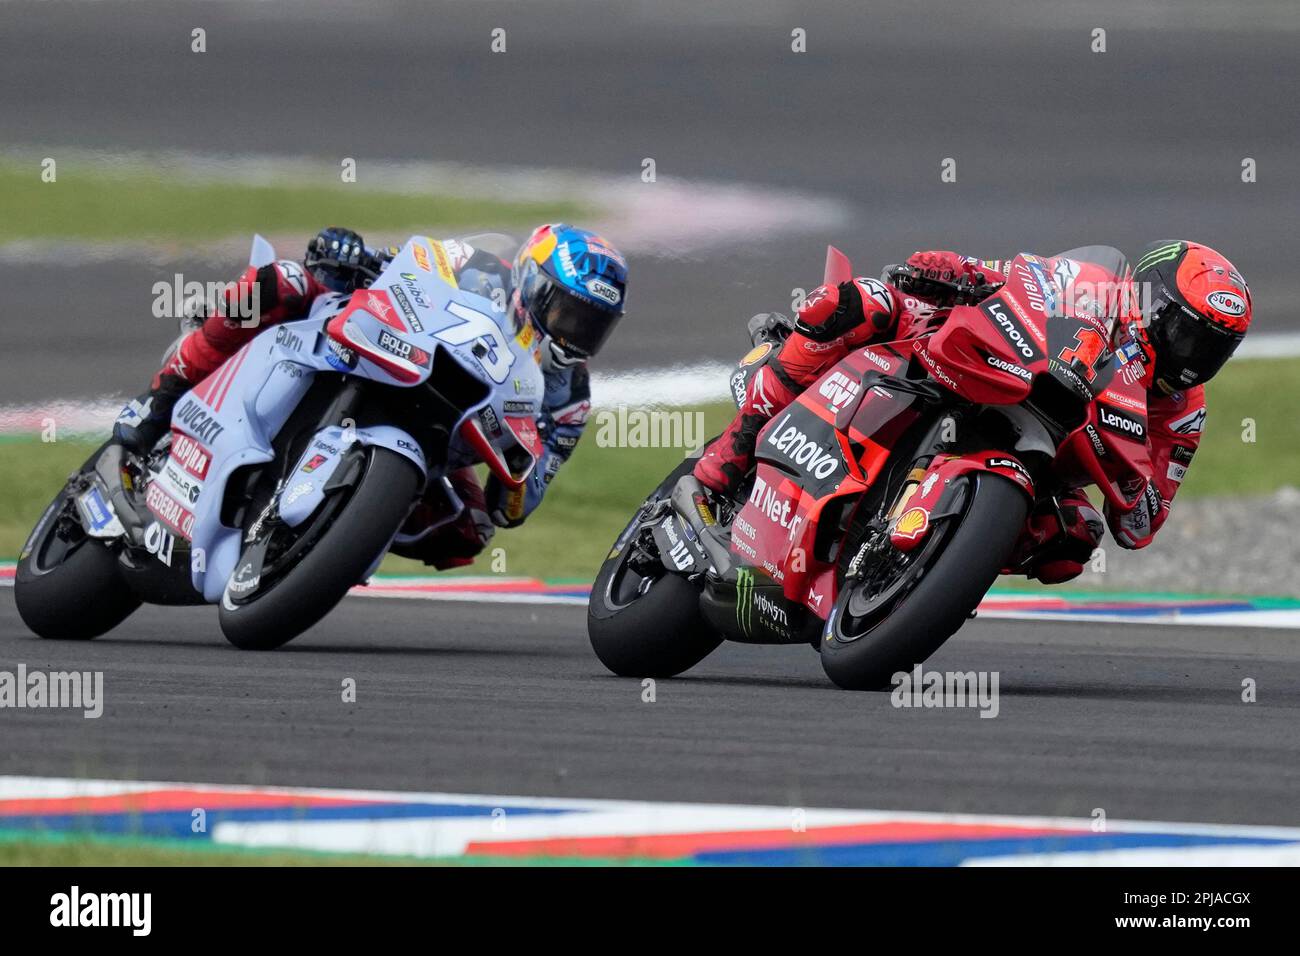 Francesco Bagnaia, from Italy, right, and Alex Marquez, from Spain, drive their Ducati during the MotoGP free practice in Termas de Rio Hondo, Argentina, Saturday, April 1, 2023